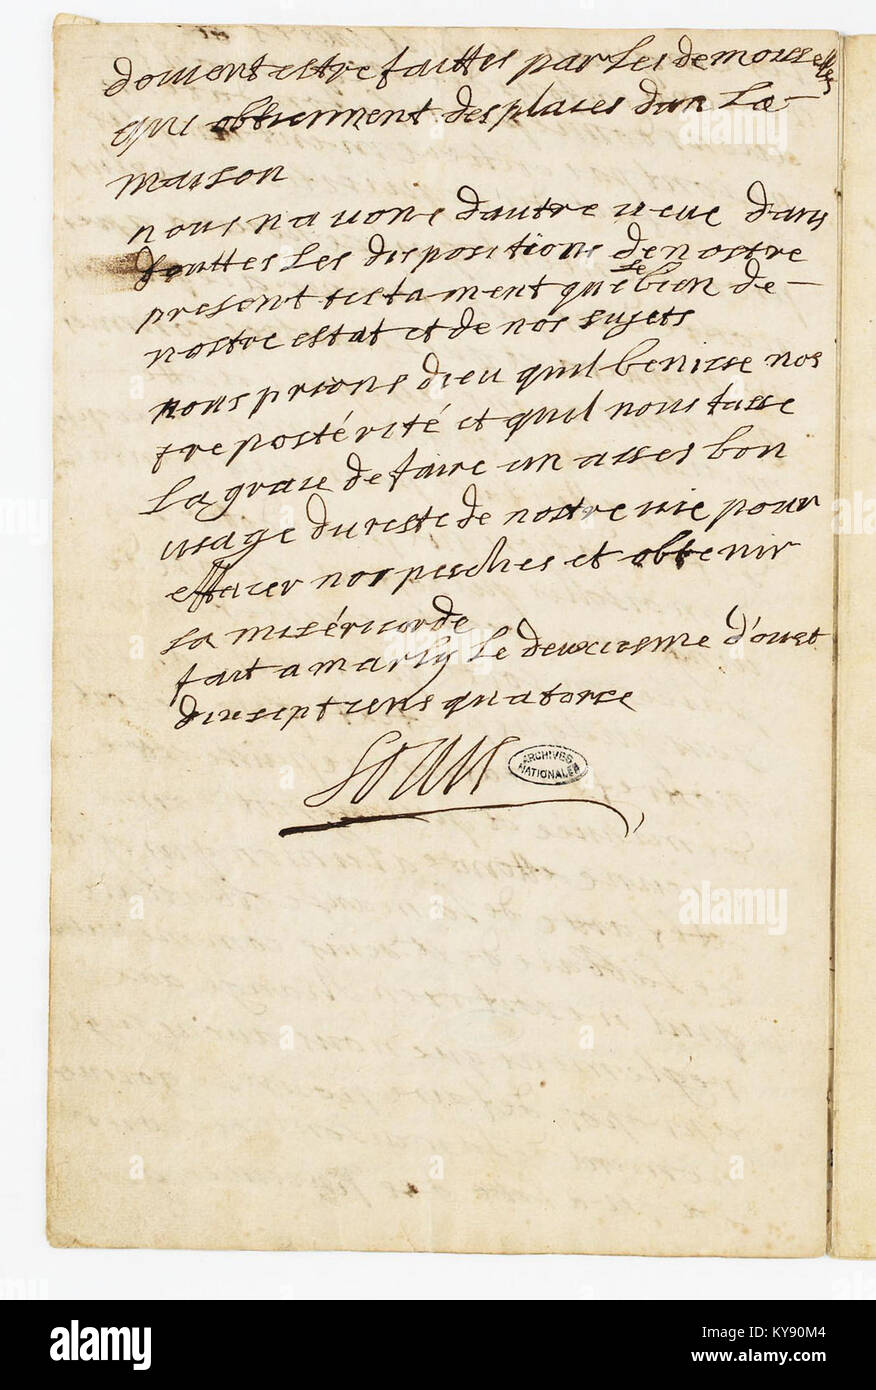 Testament de Louis XIV. Page 15 - Archives Nationales - AE-I-25 n°1 Stock Photo